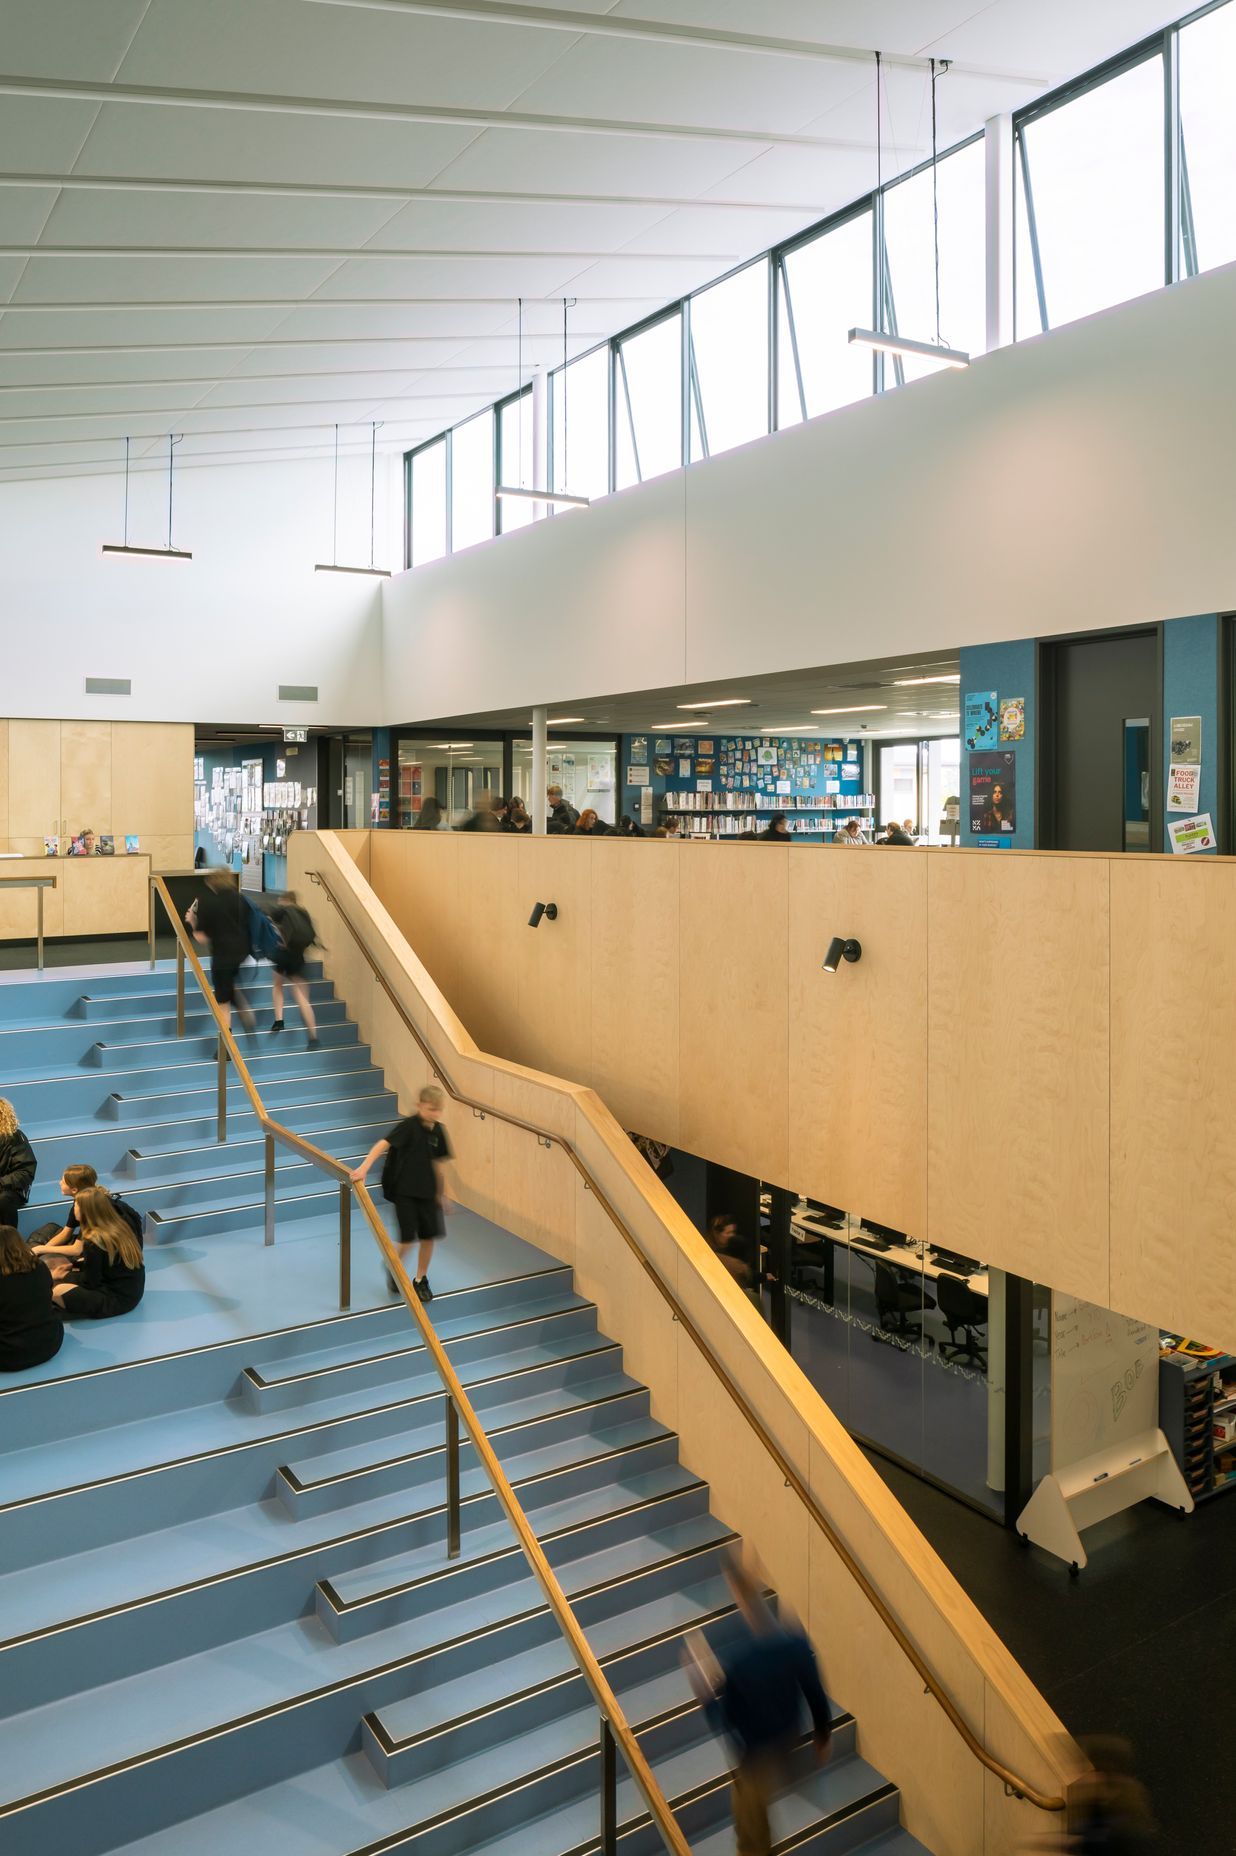 The creativity and innovation hub features blue walls and stairs.